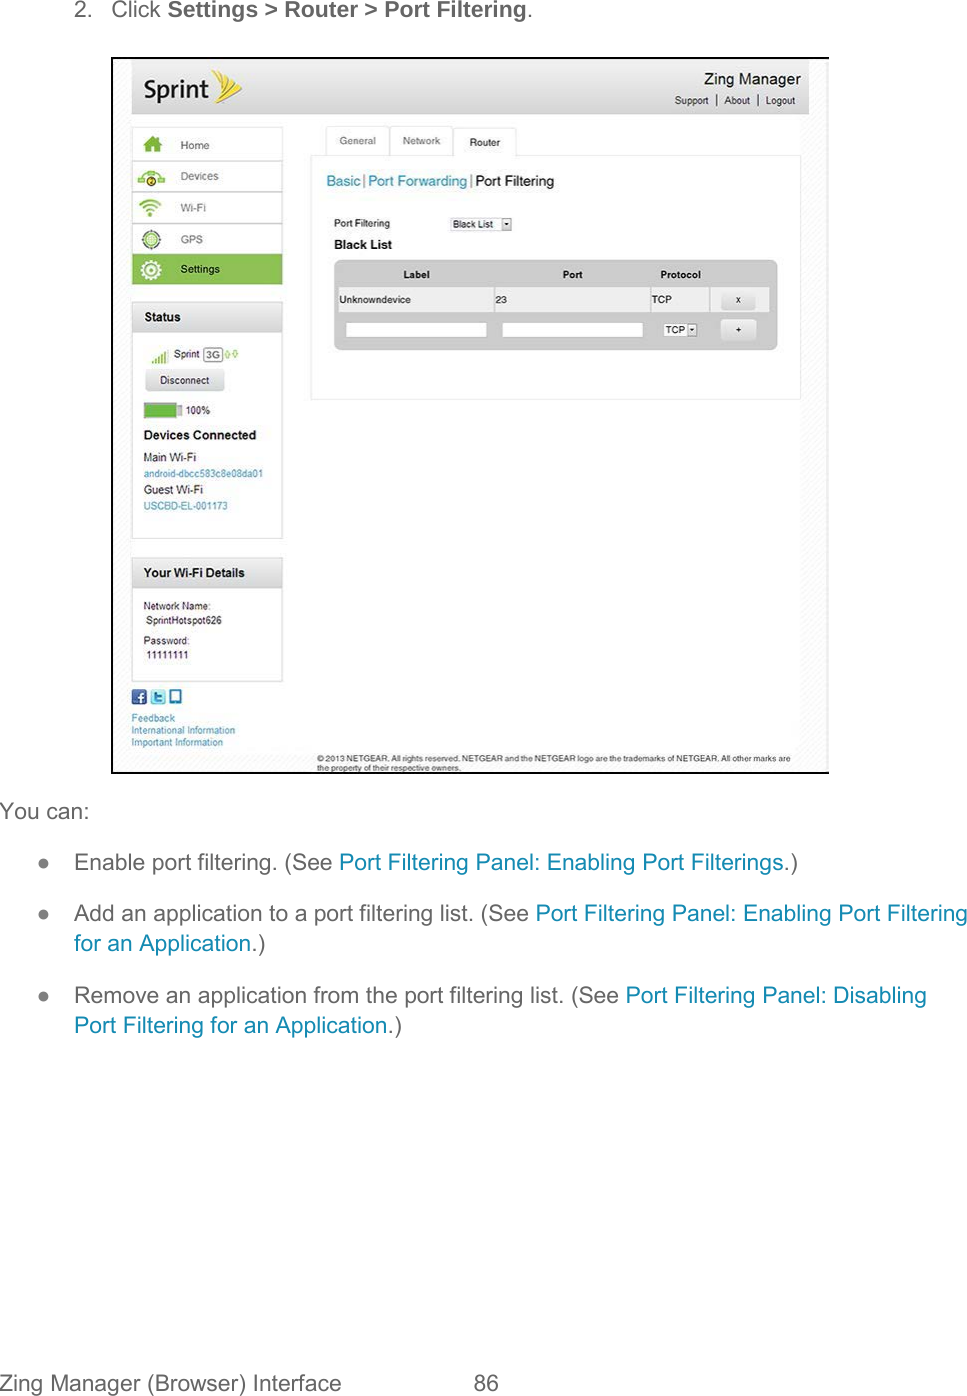 2. Click Settings &gt; Router &gt; Port Filtering.   You can: ●  Enable port filtering. (See Port Filtering Panel: Enabling Port Filterings.) ●  Add an application to a port filtering list. (See Port Filtering Panel: Enabling Port Filtering for an Application.) ●  Remove an application from the port filtering list. (See Port Filtering Panel: Disabling Port Filtering for an Application.) Zing Manager (Browser) Interface 86   